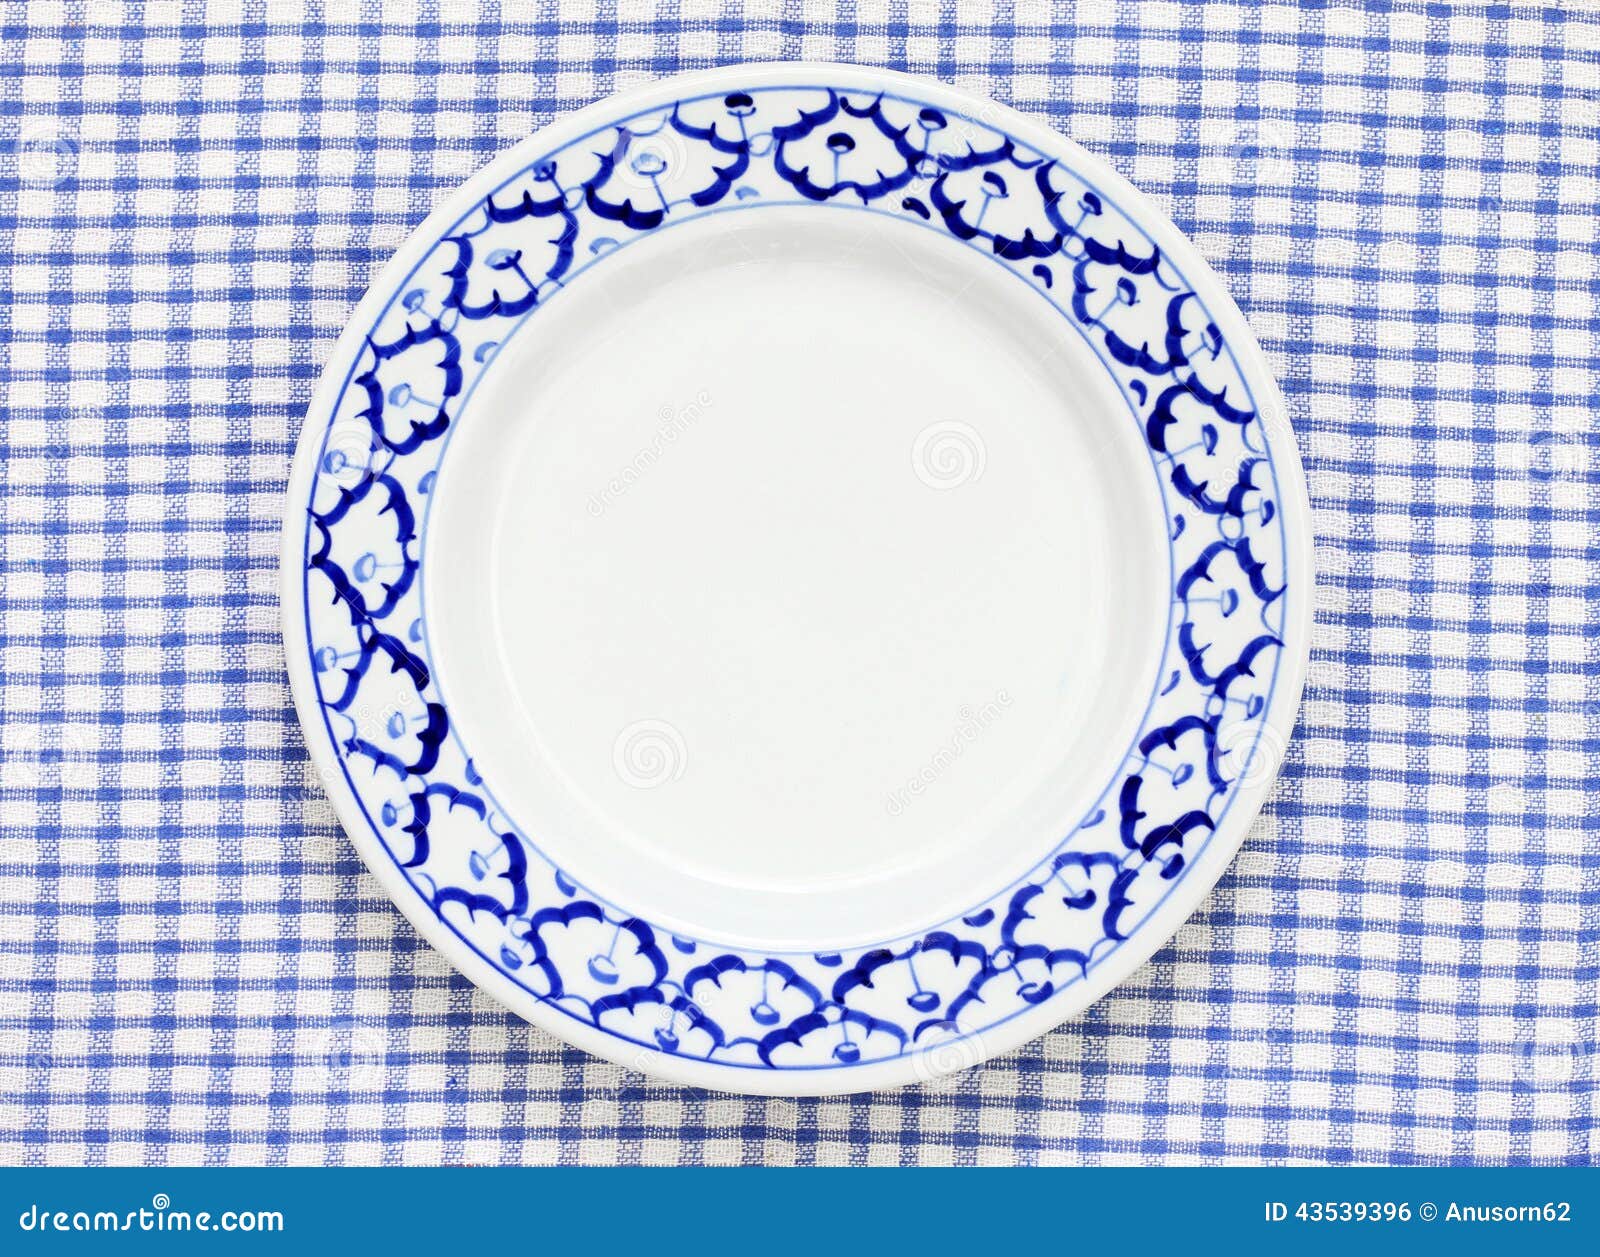 Blue And White Plate Pineapple Pattern Traditional Style Stock Photo Image of food, department